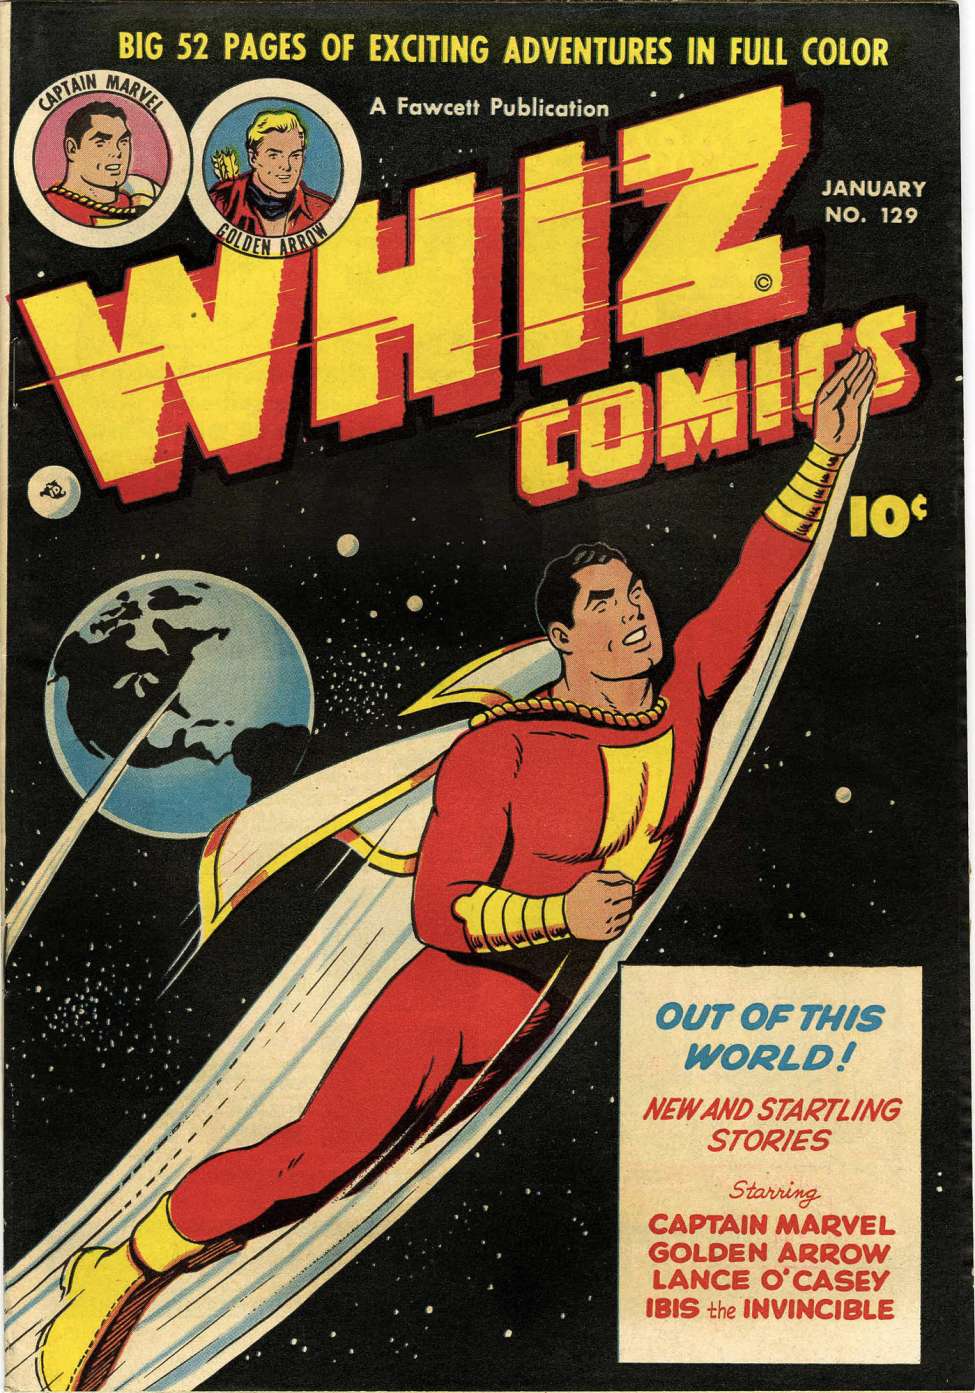 Book Cover For Whiz Comics 129